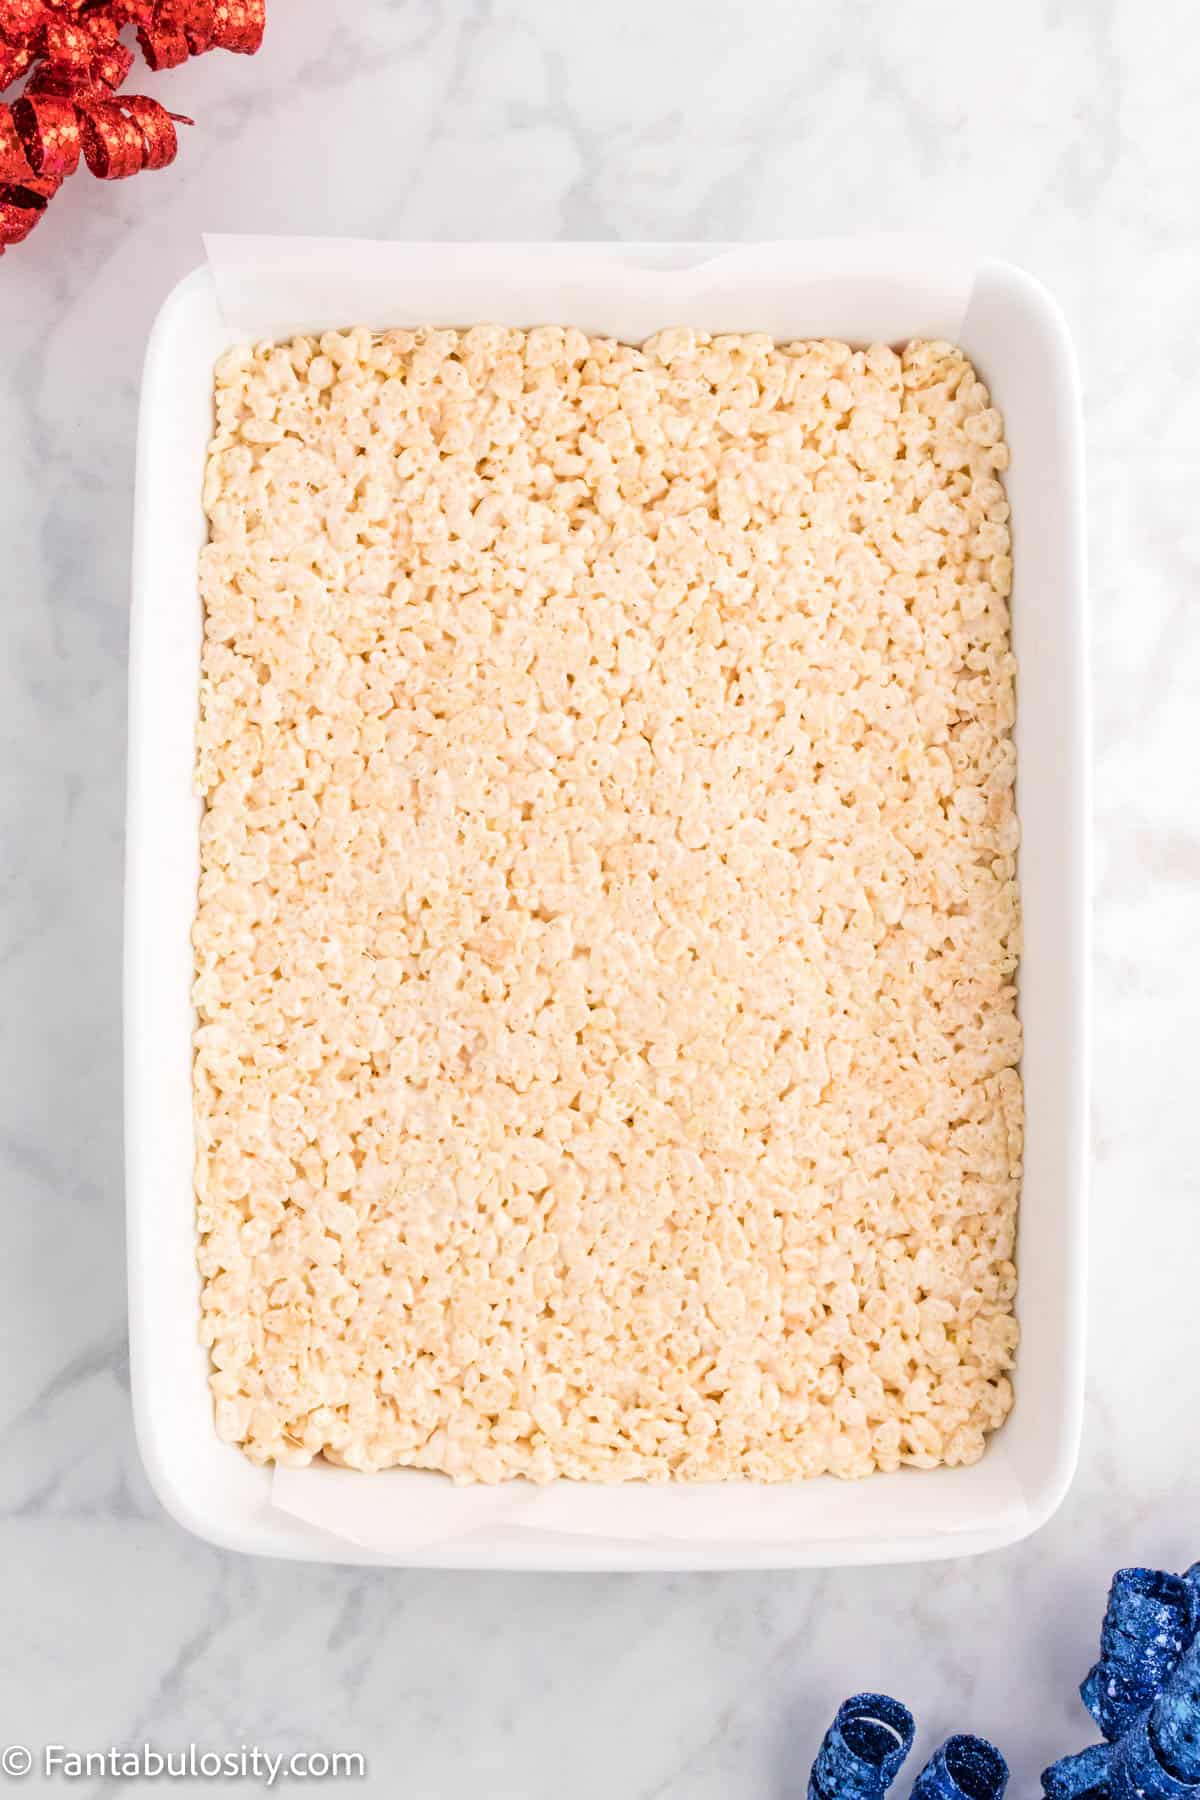 A white layer of Rice Krispies on top of the red layer in the 9x13 pan.